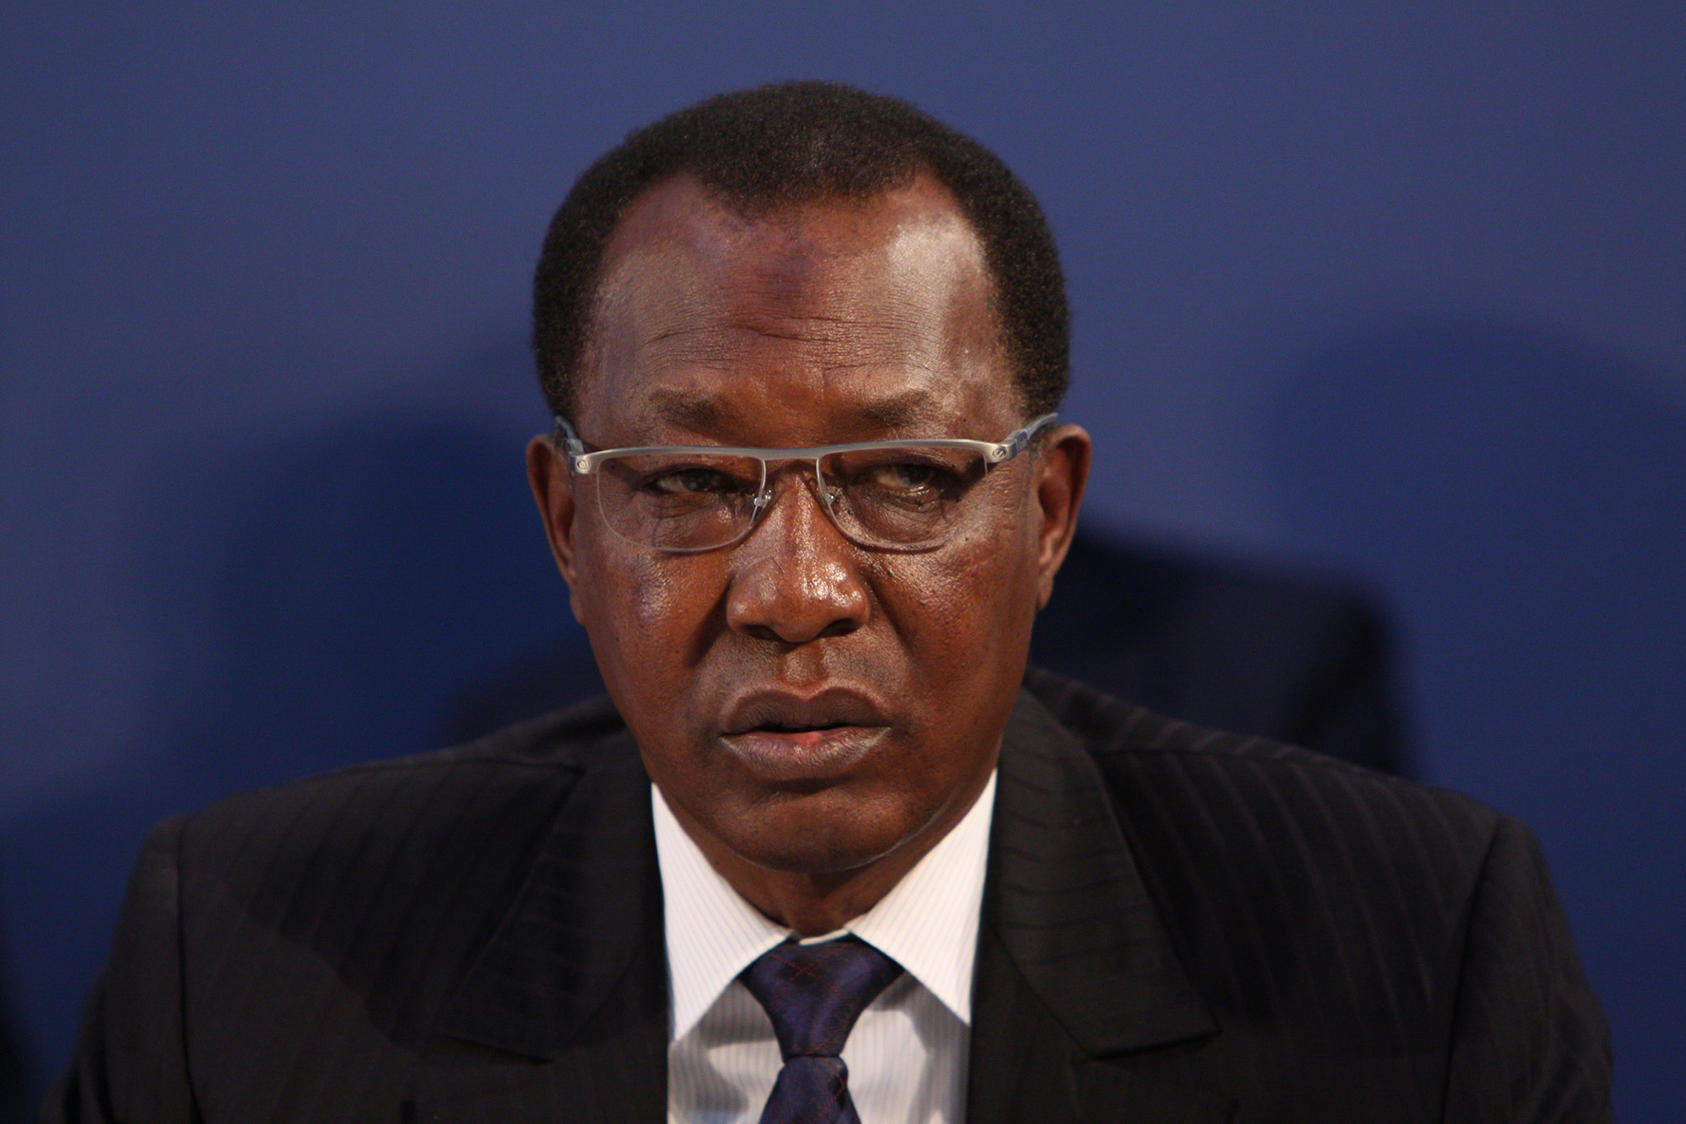 Deceased President Idriss Déby at a conference in London. His death has left open questions about Chad’s political future and the broader regional fight against terrorism. (UK Foreign, Commonwealth & Development Office)